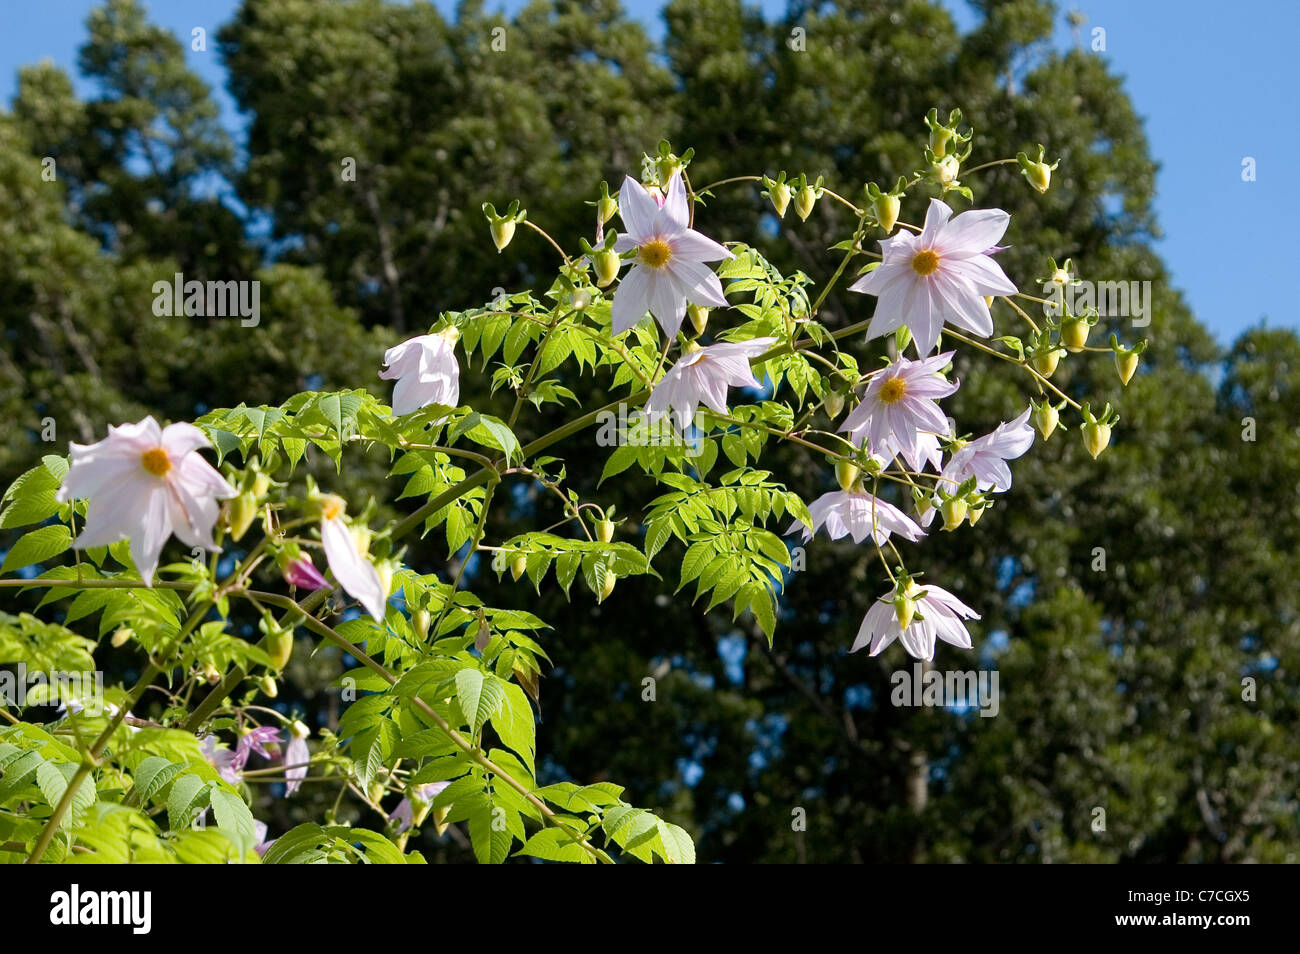 Close-up of the flowers of the Tree Dahlia (Dahlia imperialis) also known as Bell Tree Dahlia. Stock Photo